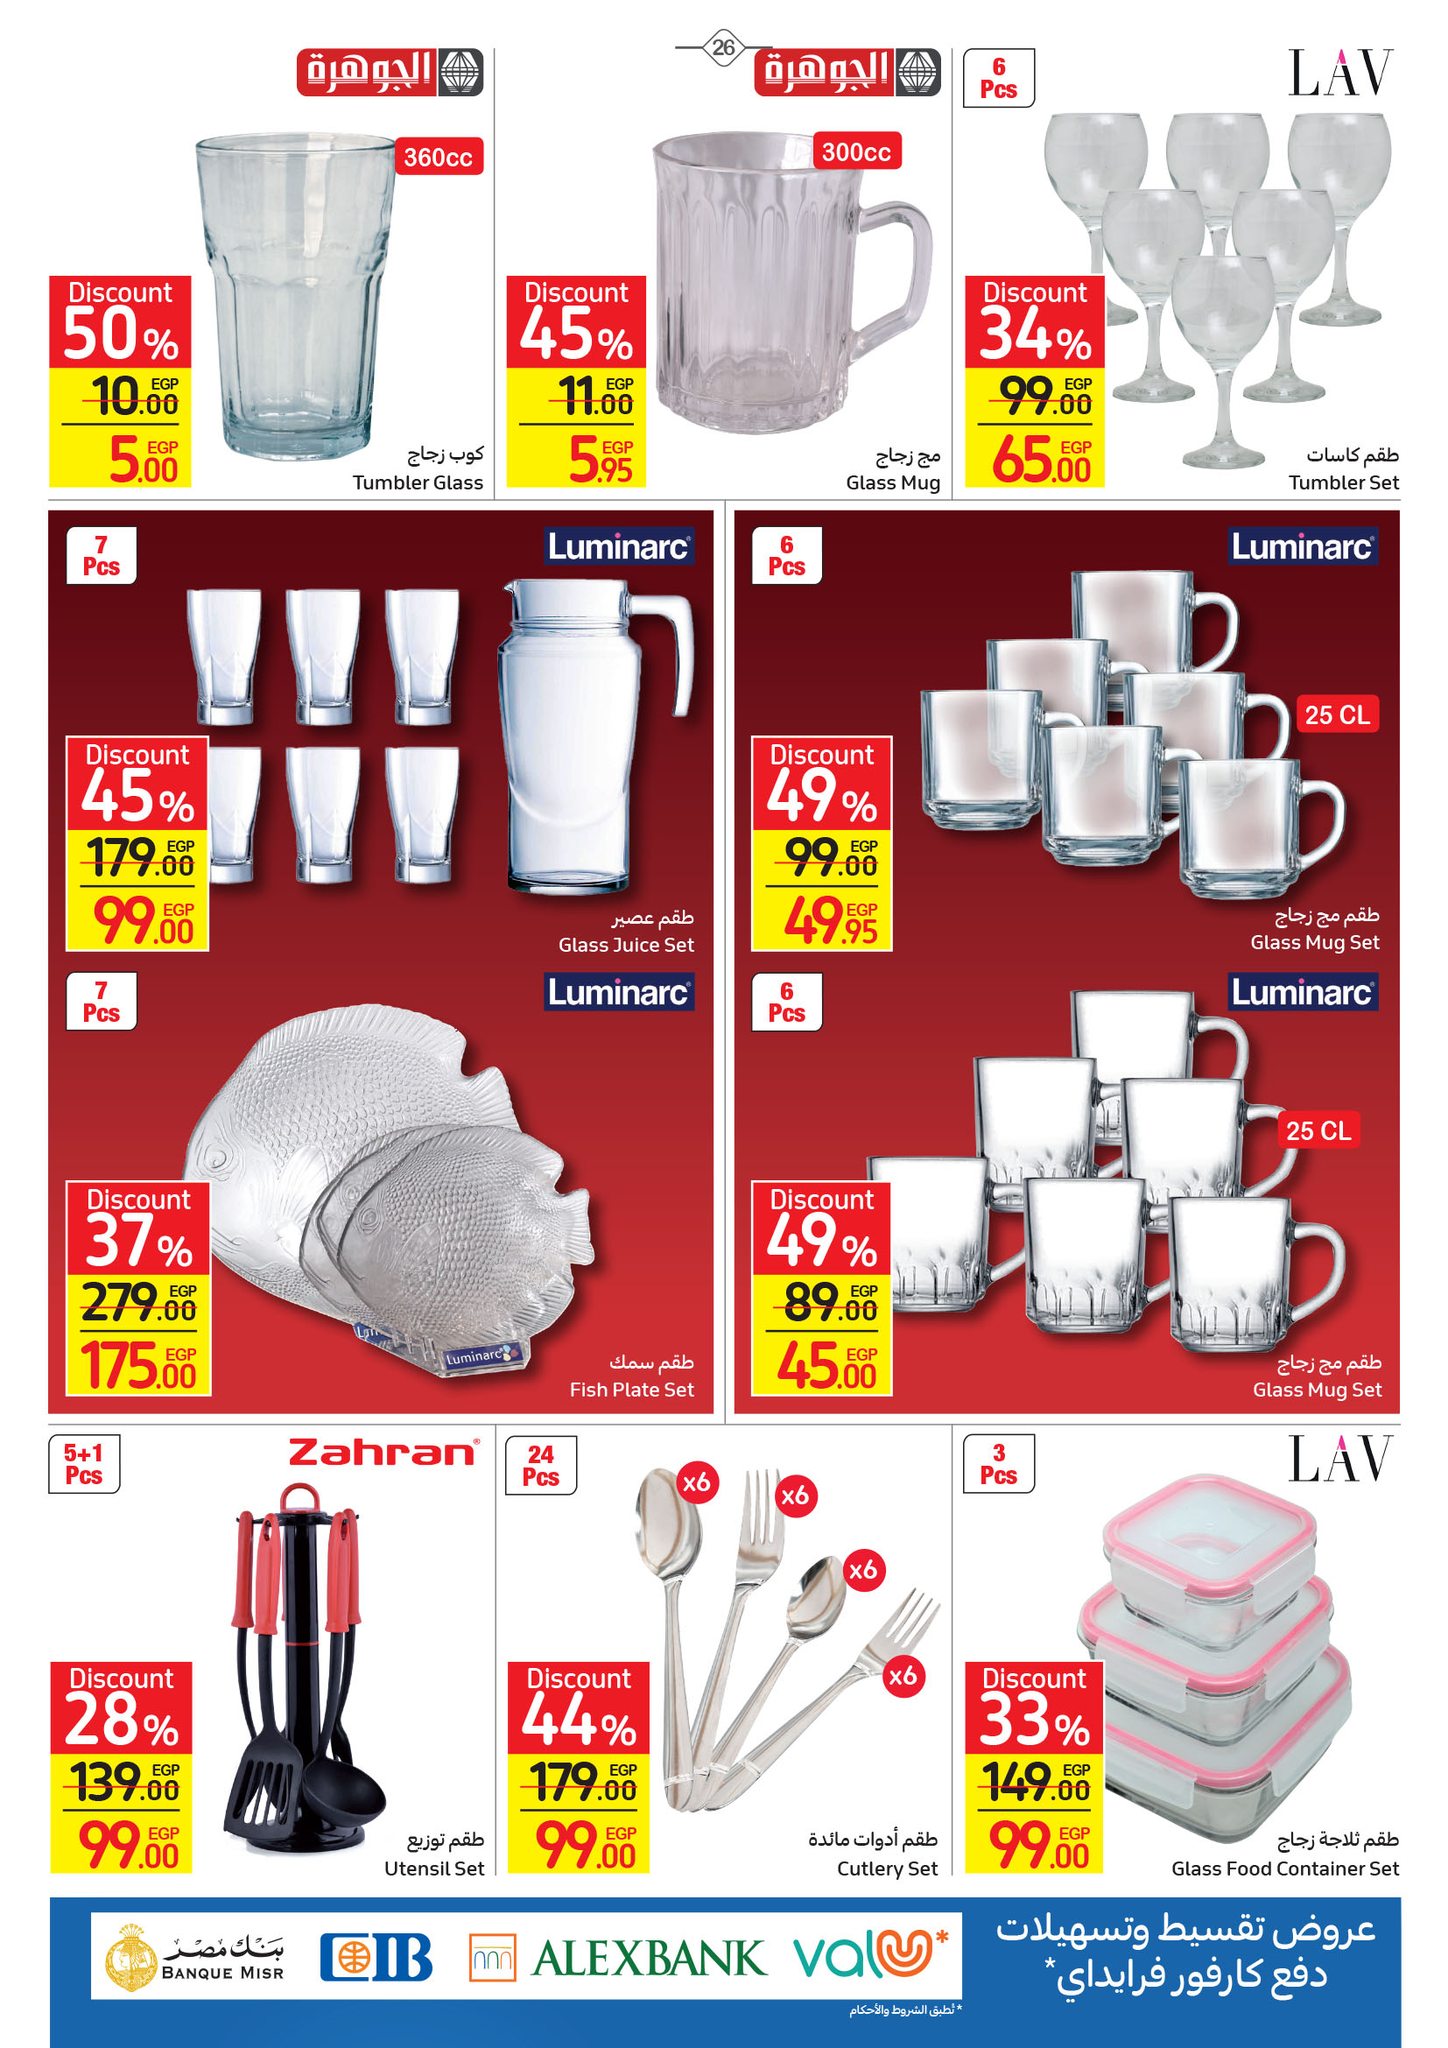 Watch the latest Carrefour half price offers "Last Chance Offer" until December 4 26